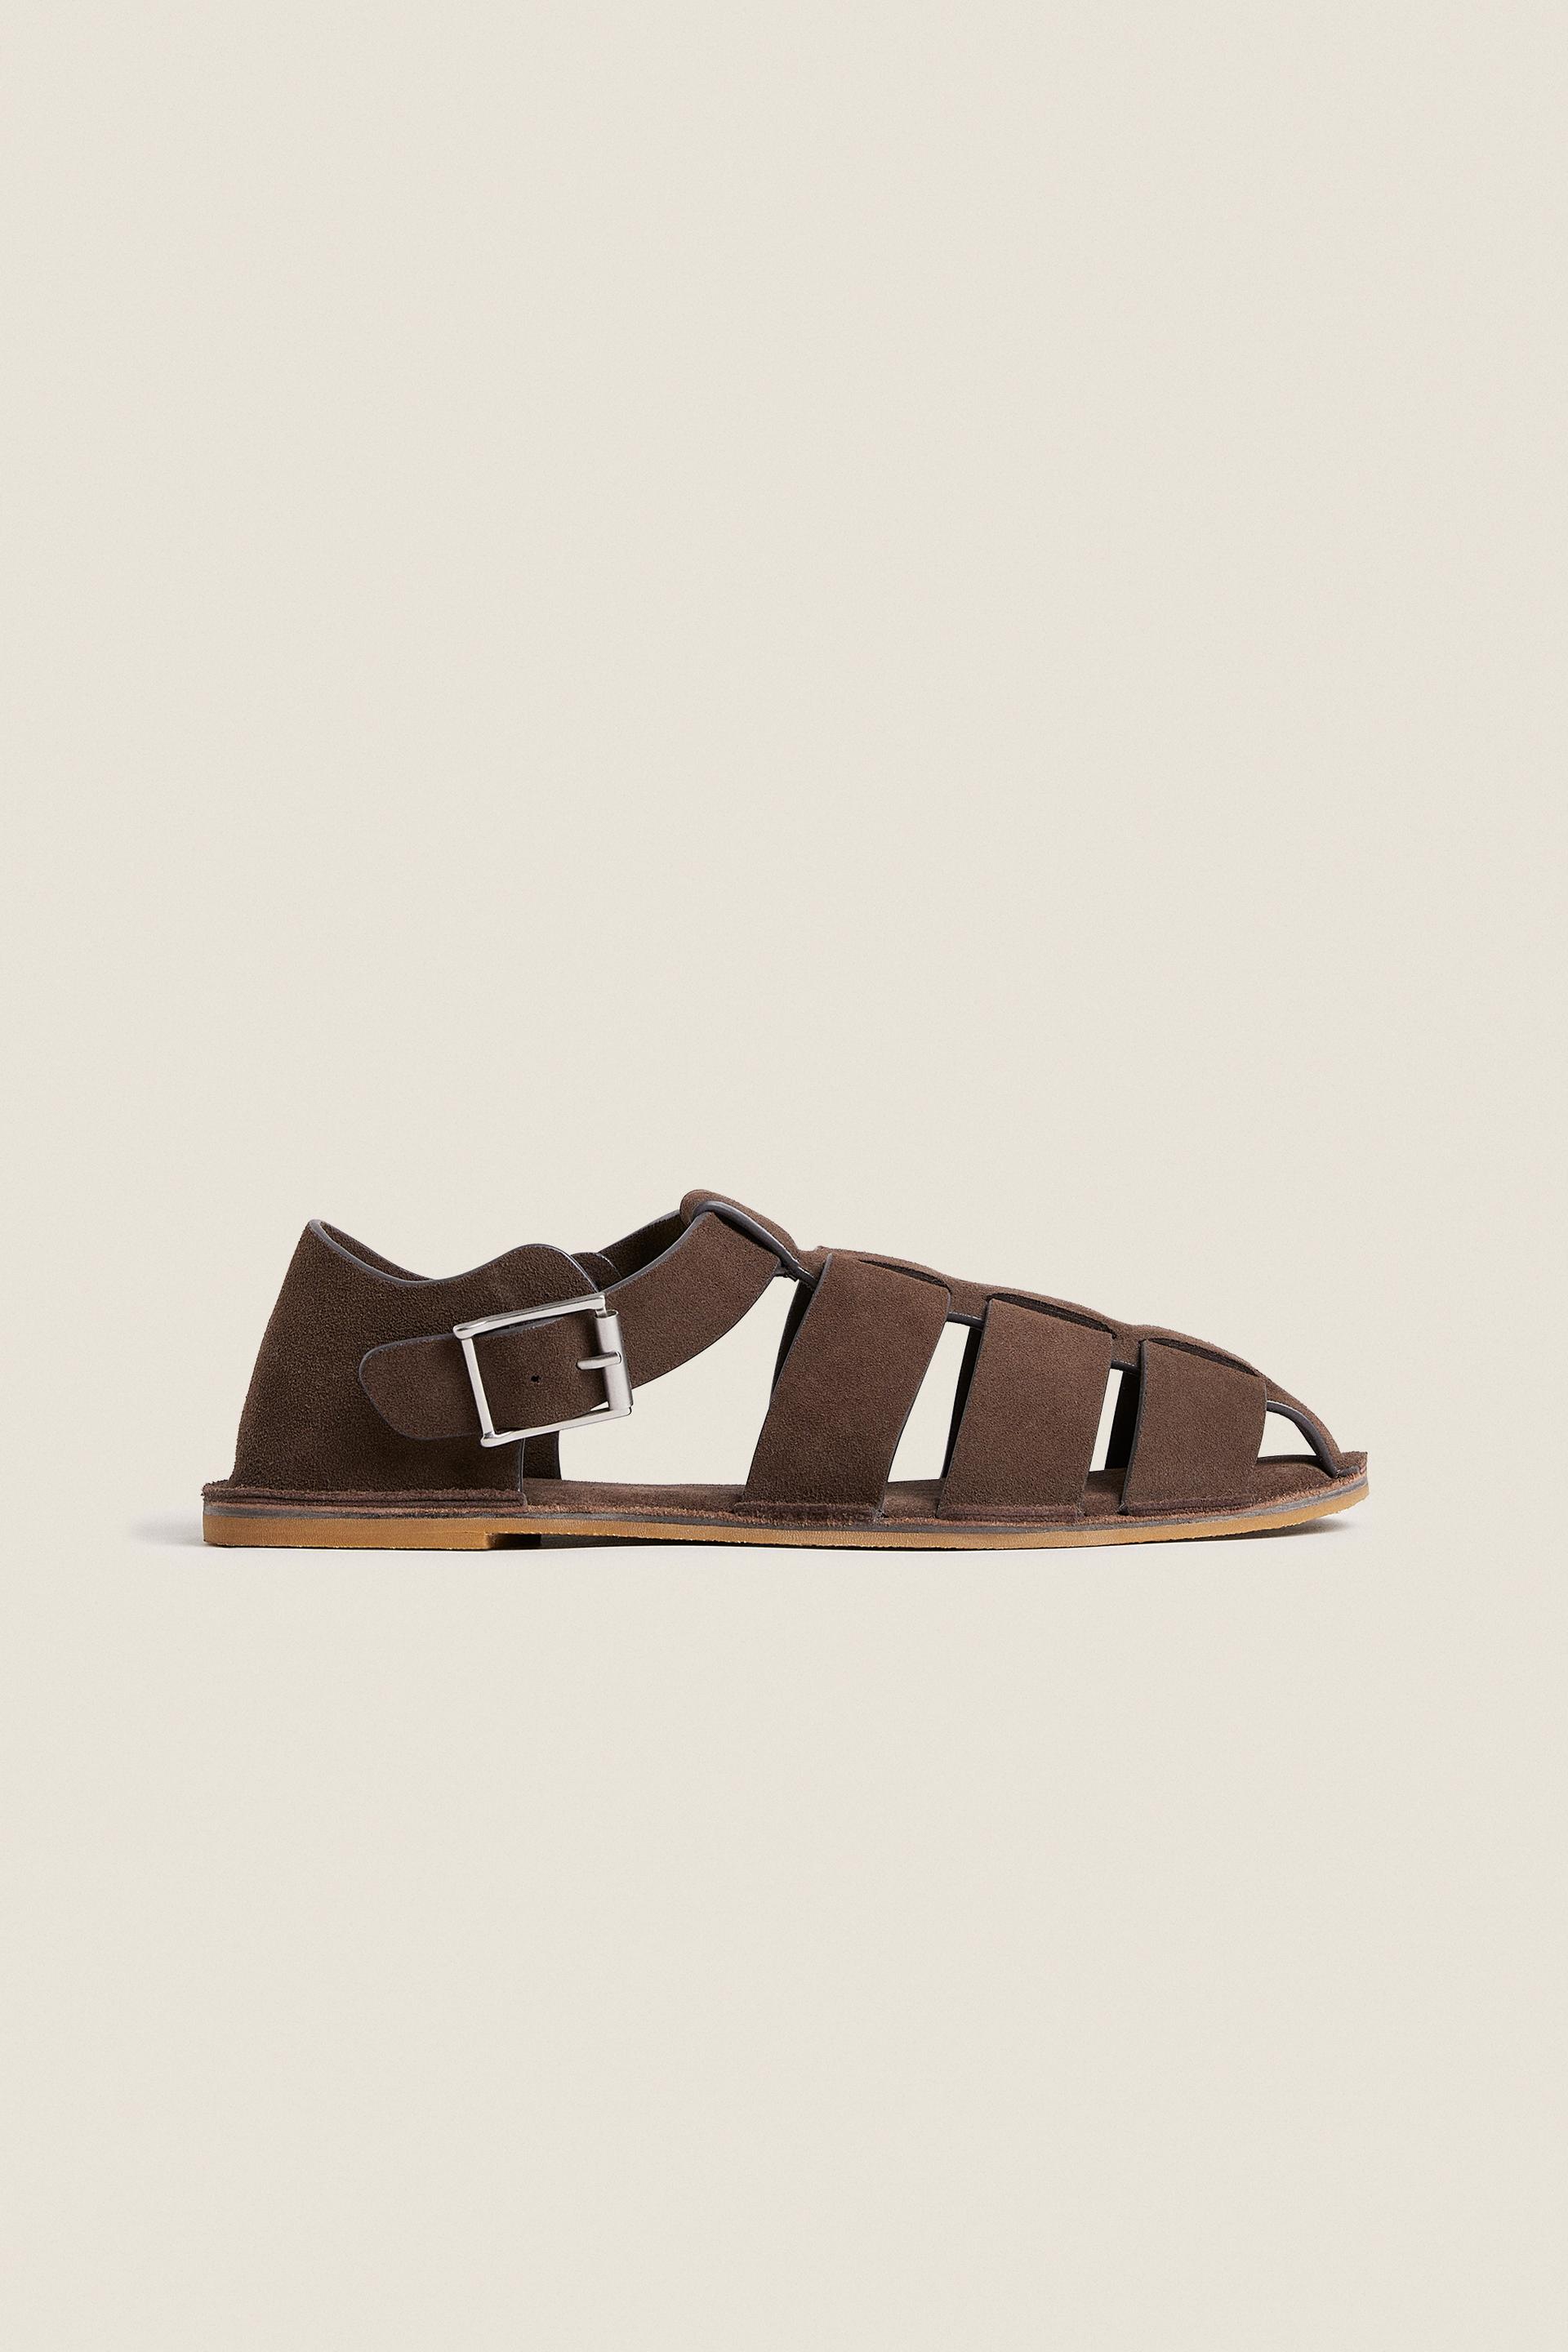 LEATHER CAGE SANDALS ZARA